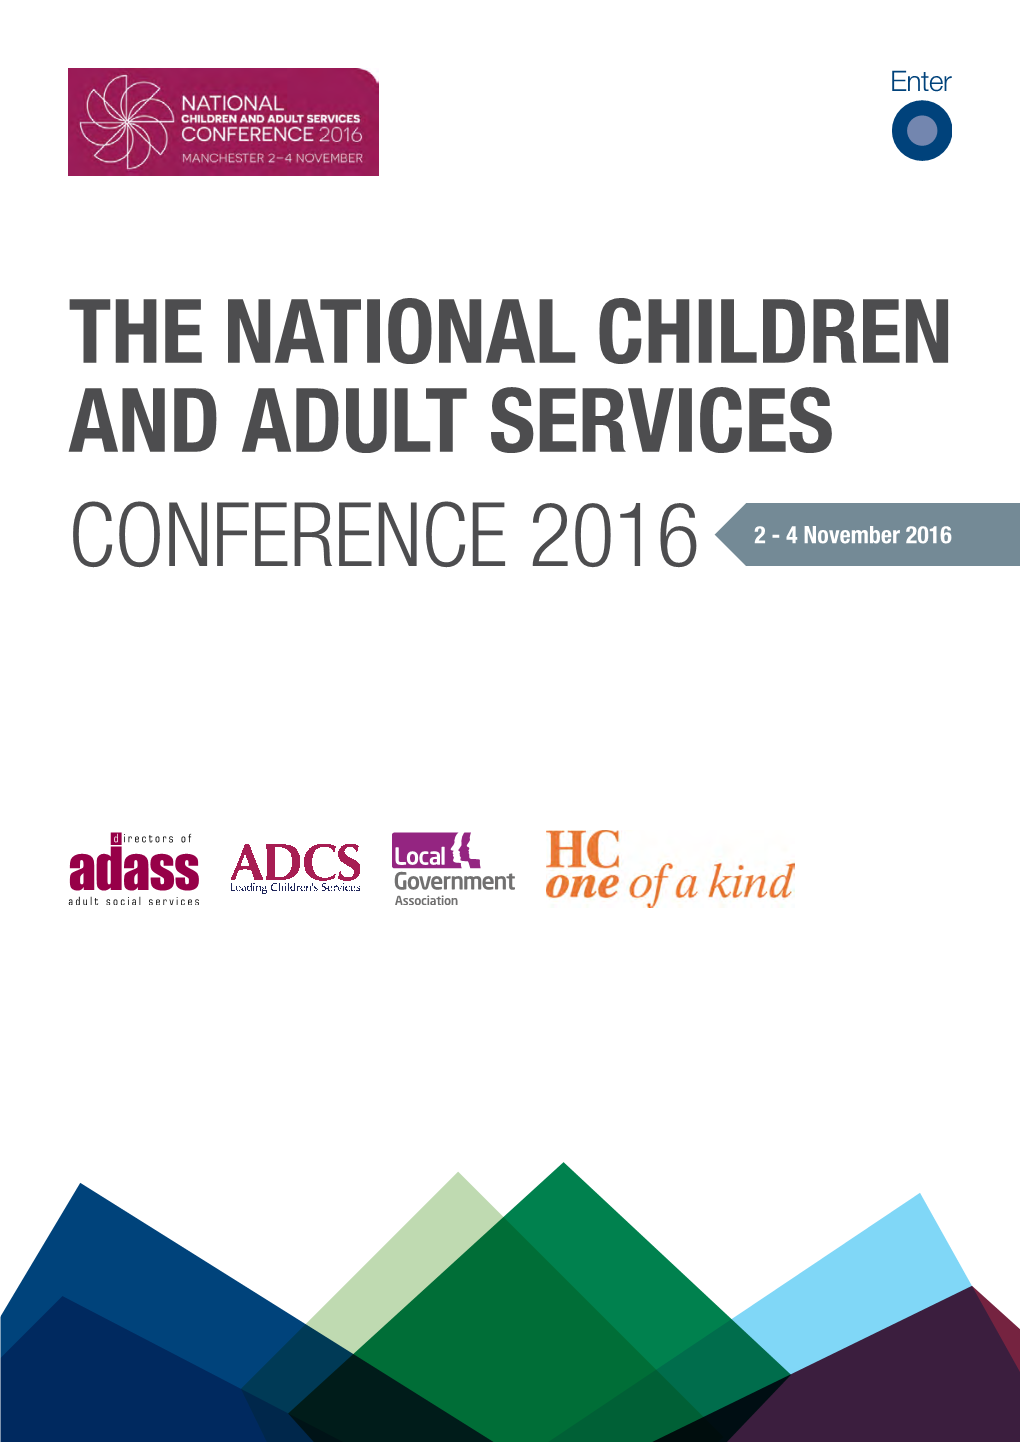 The National Children and Adult Services